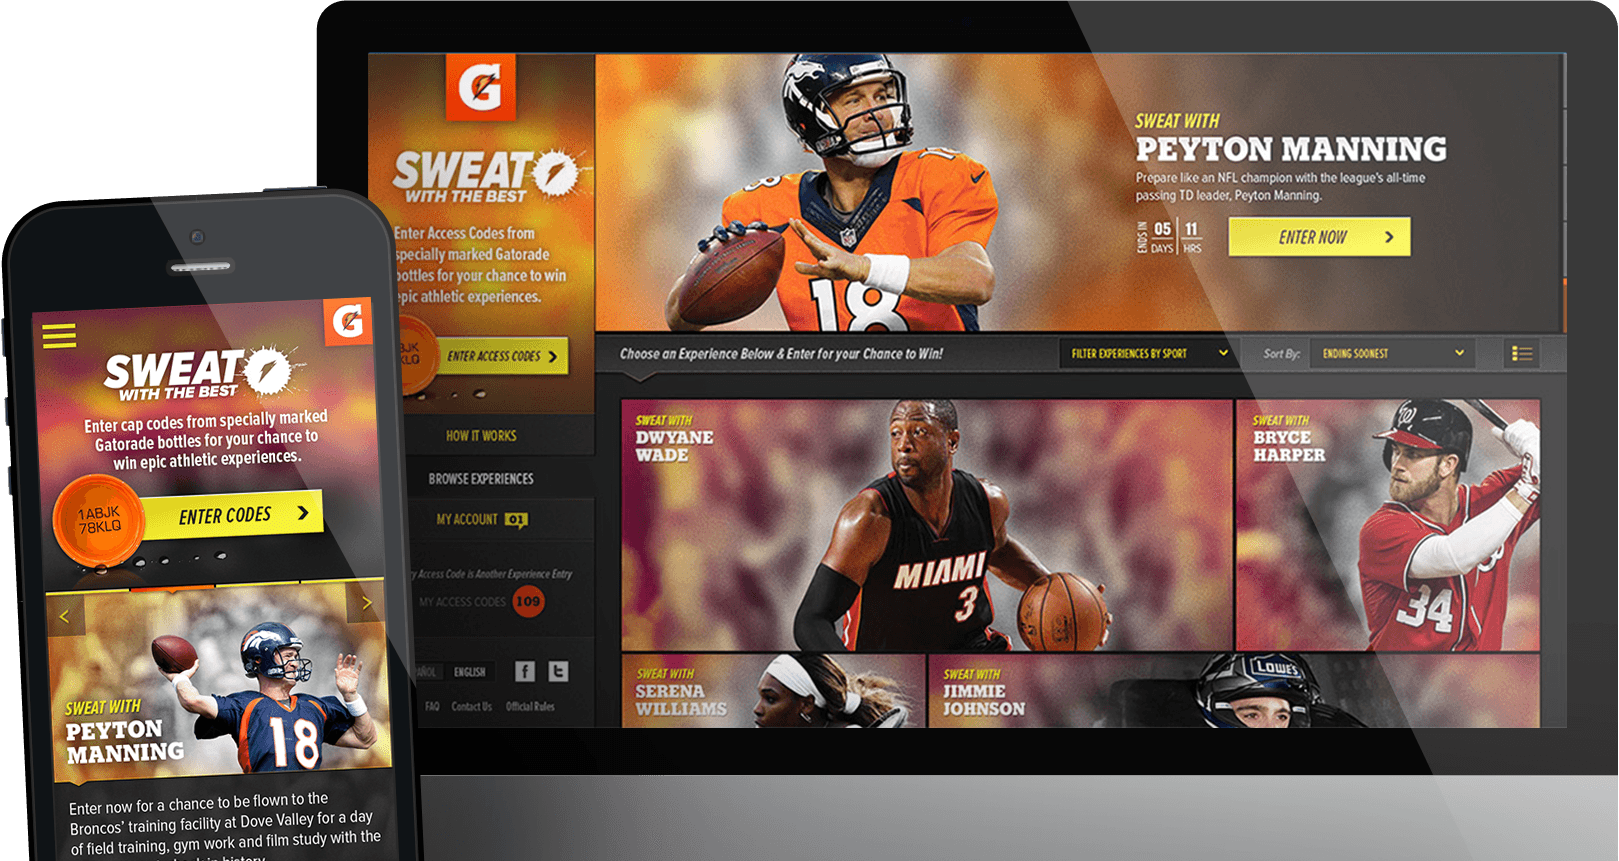 Images of the Gatorade - Sweat with the Best project